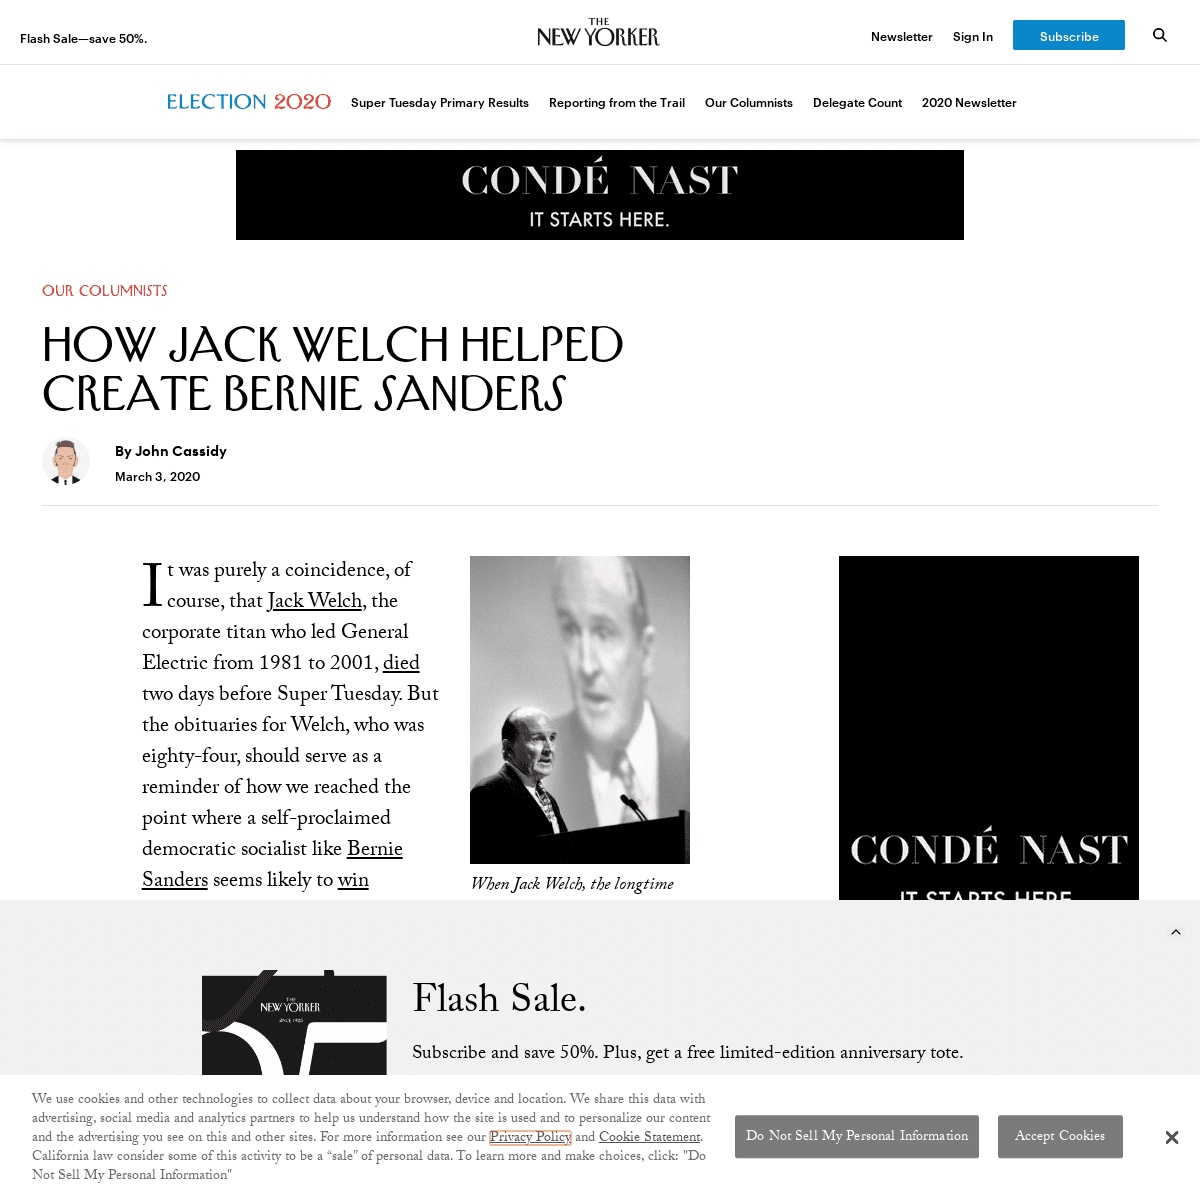 A complete backup of www.newyorker.com/news/our-columnists/how-jack-welch-helped-create-bernie-sanders